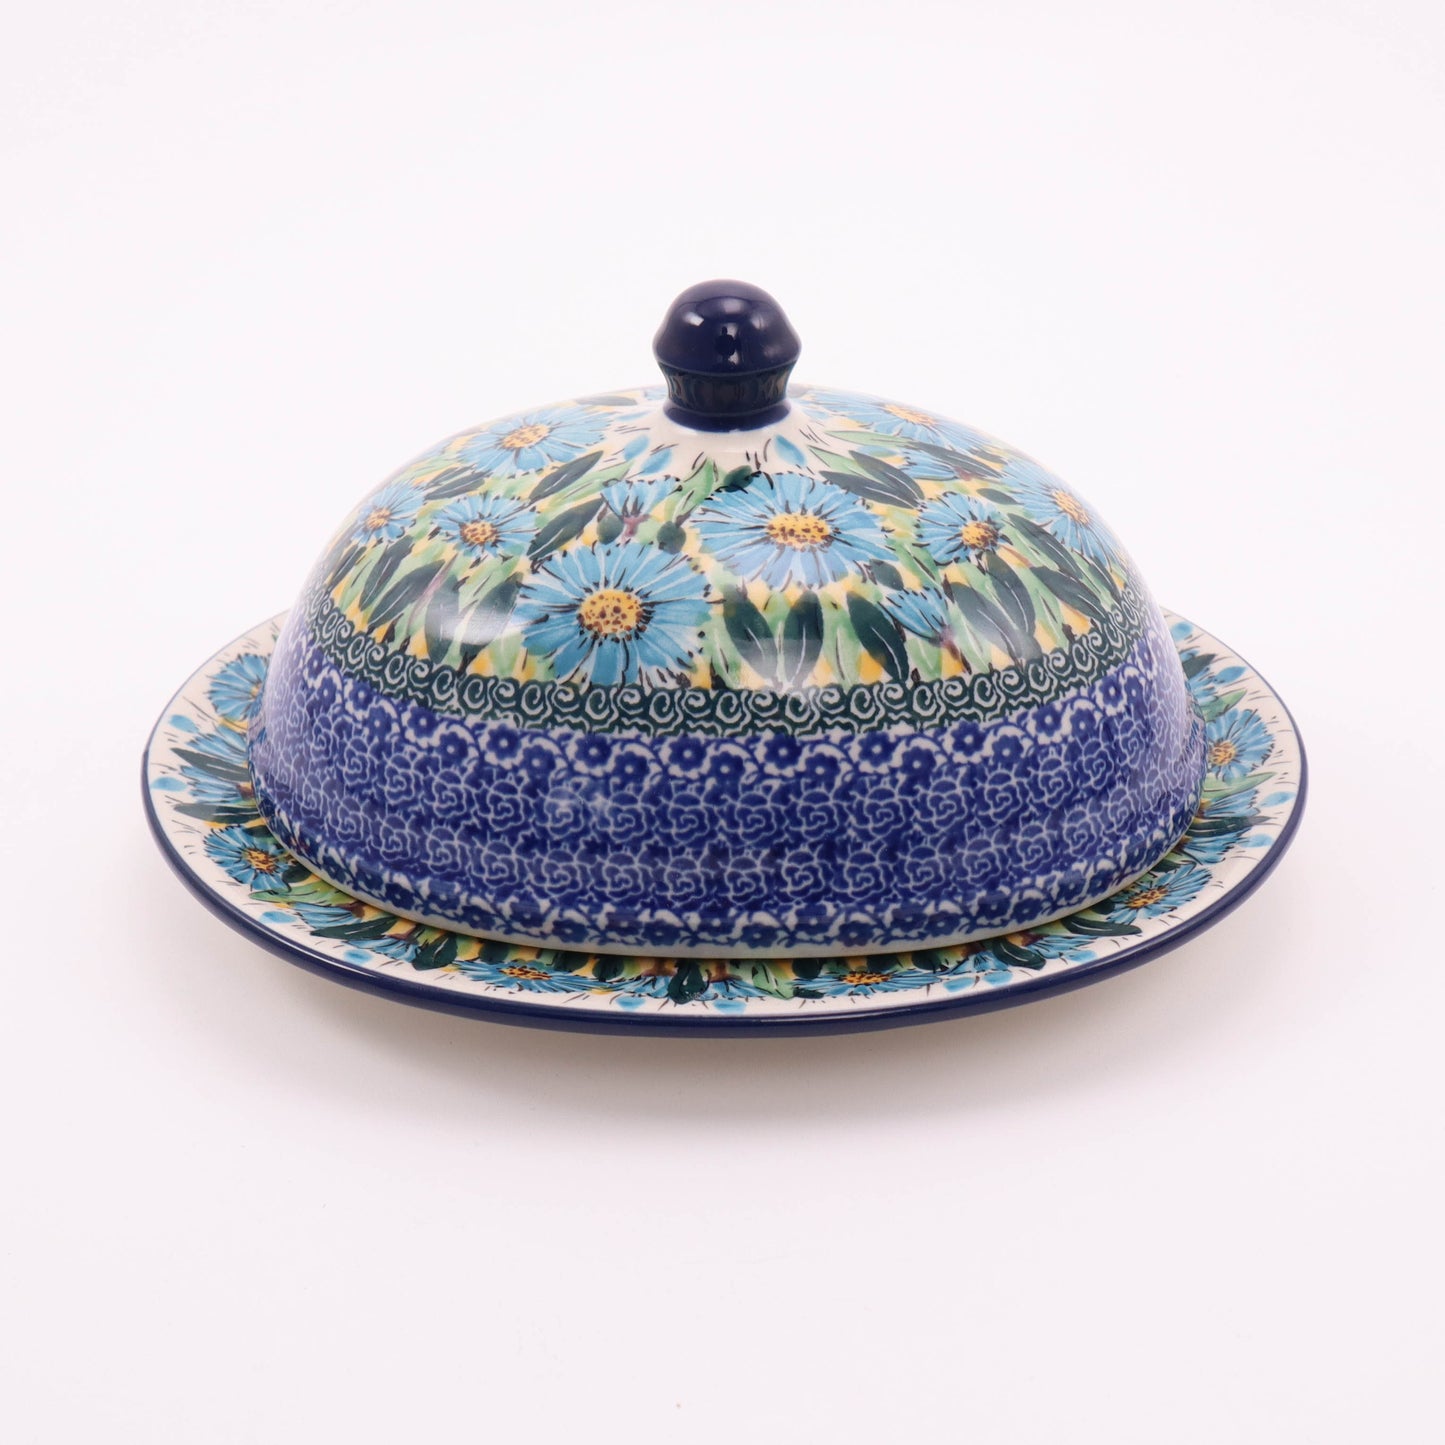 8"x7"x4" Covered Dish. Pattern: Blue Aster